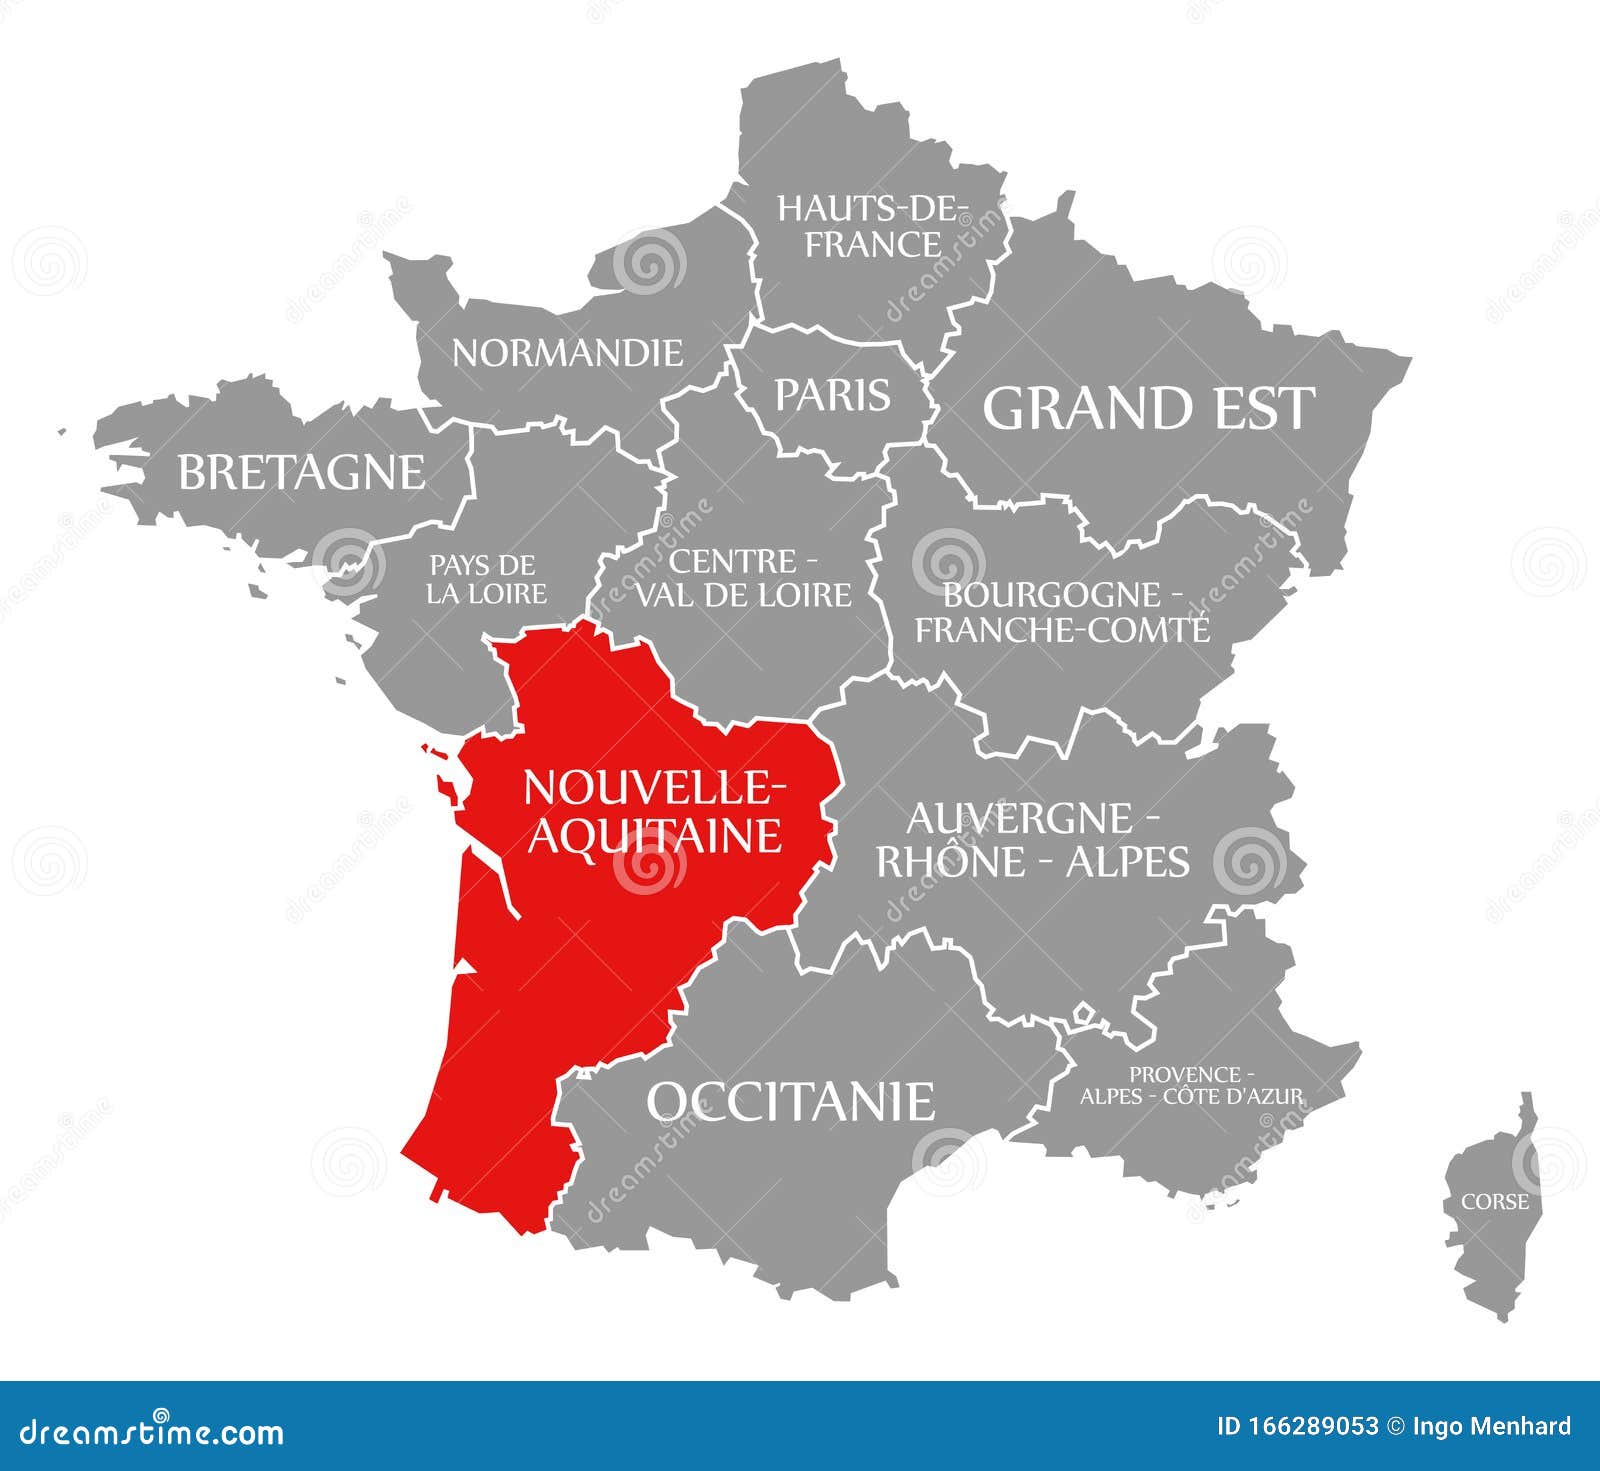 nouvelle-aquitaine red highlighted in map of france